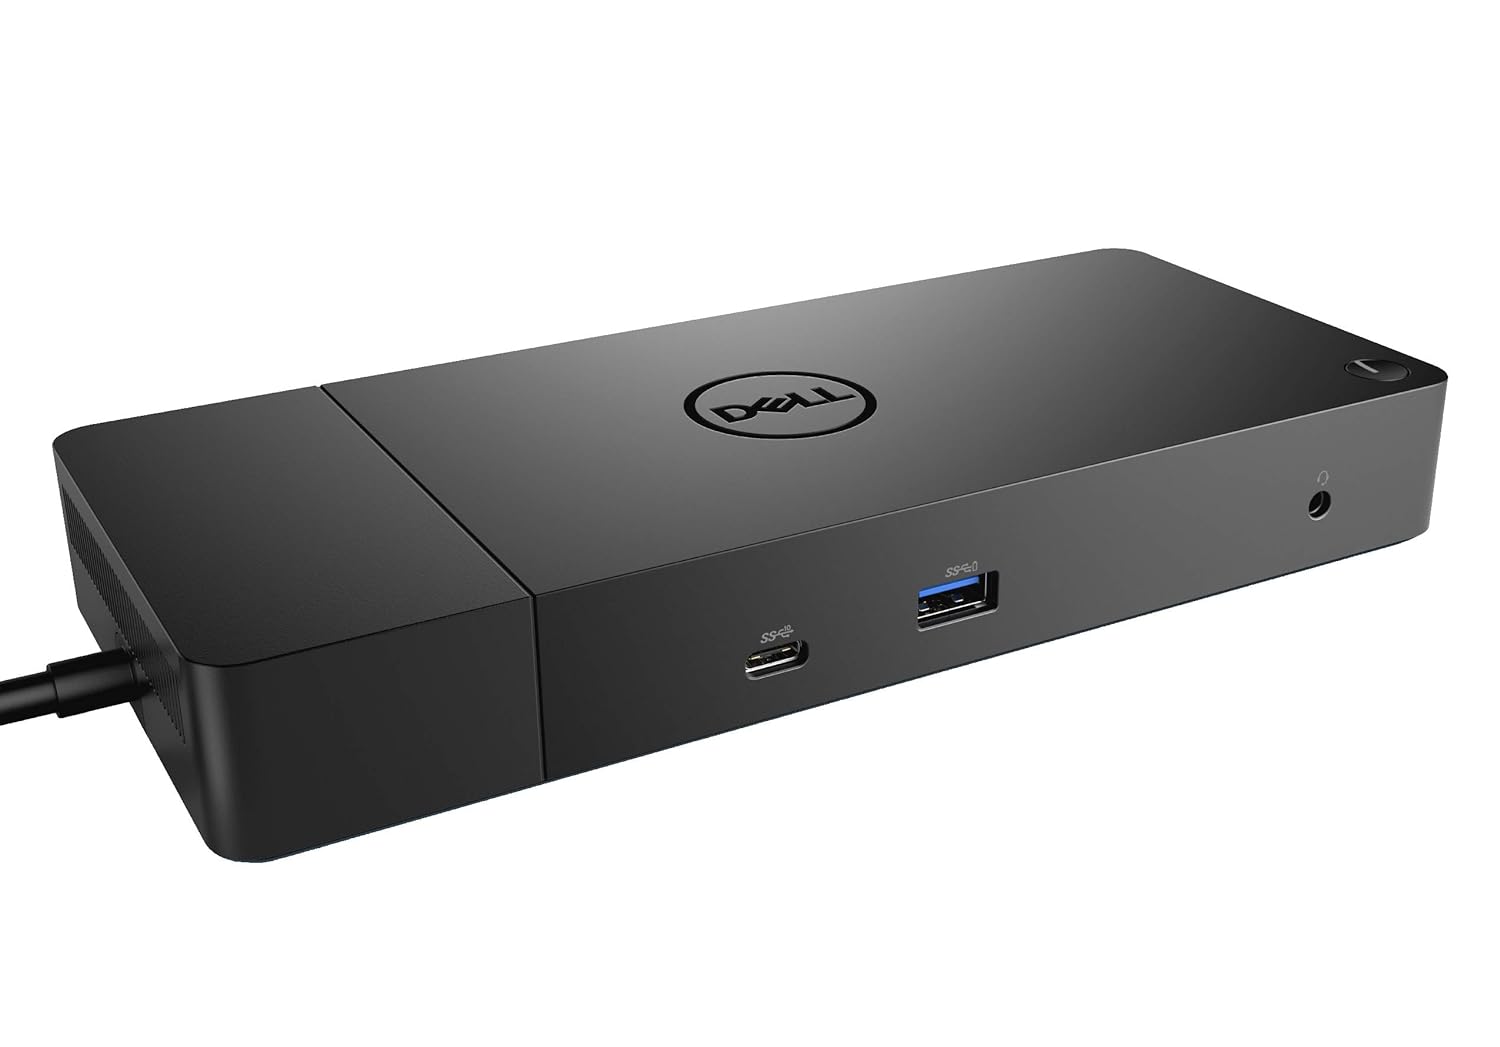 Keeping Up-to-Date: Updating Your Dell Docking Station